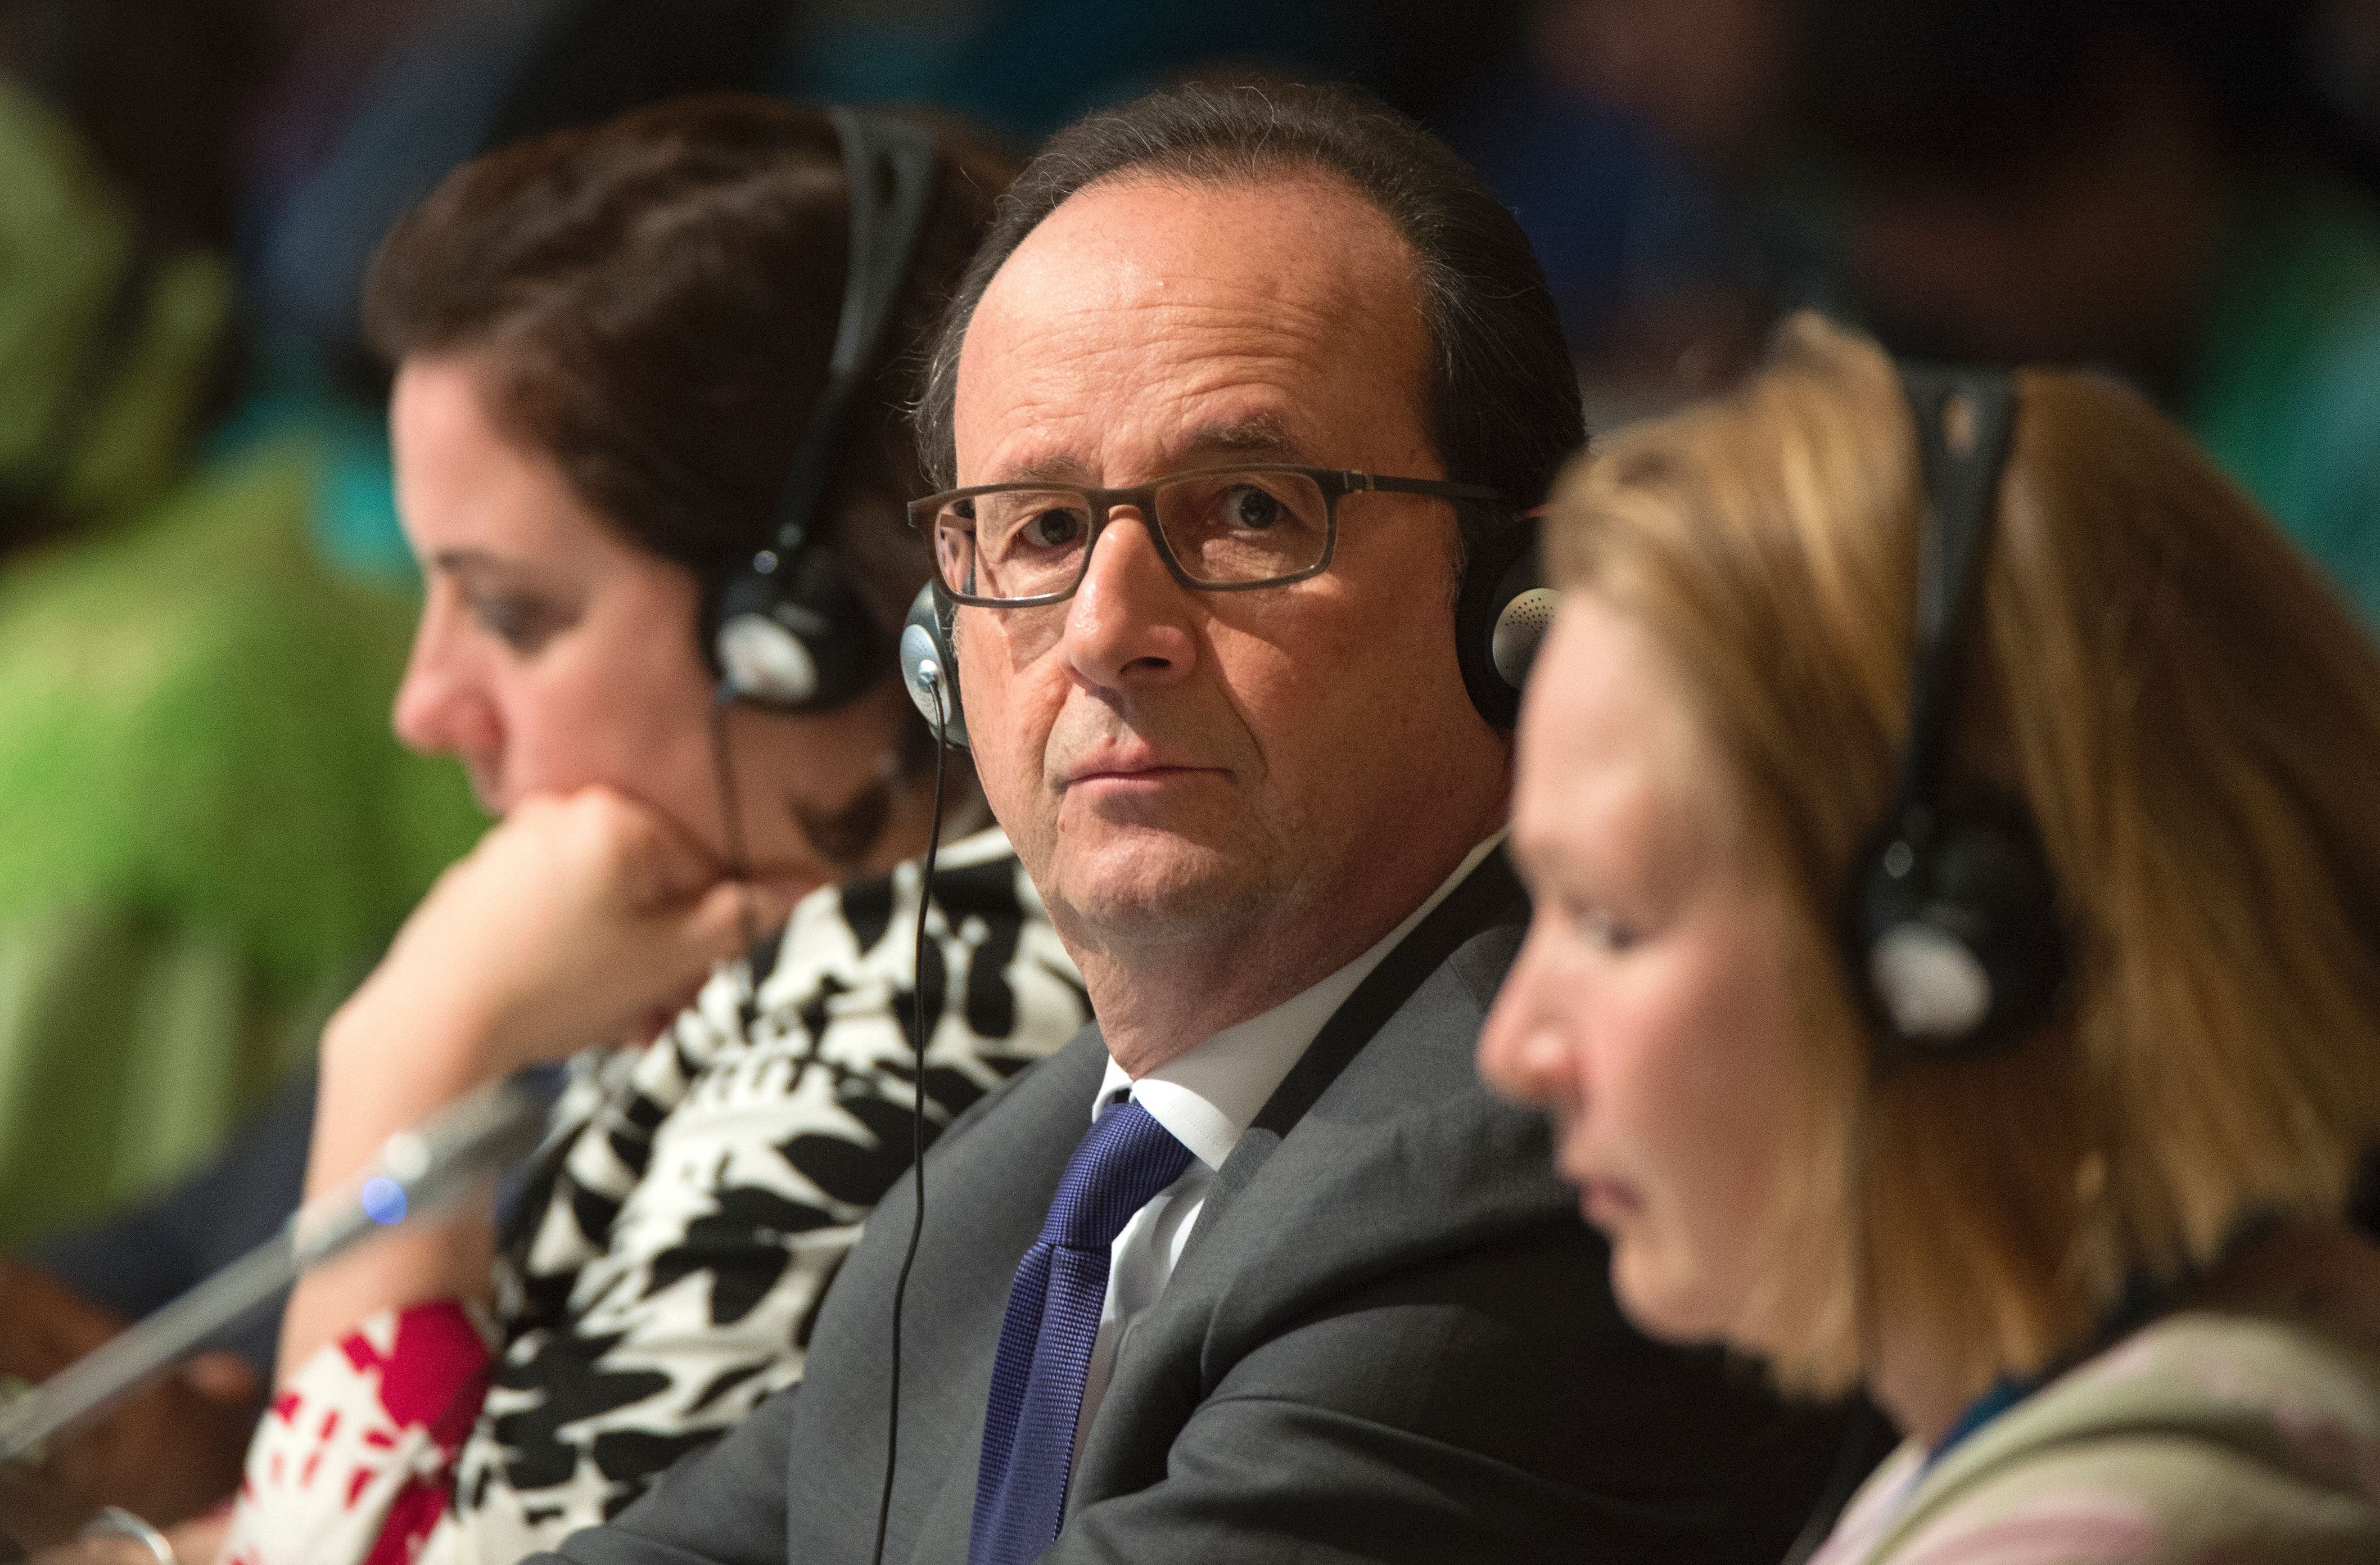 French President Francois Hollande looks on during the COP22 Climate Change Conference in Marrakesh on November 15, 2016. (FADEL SENNA—AFP/Getty Images)